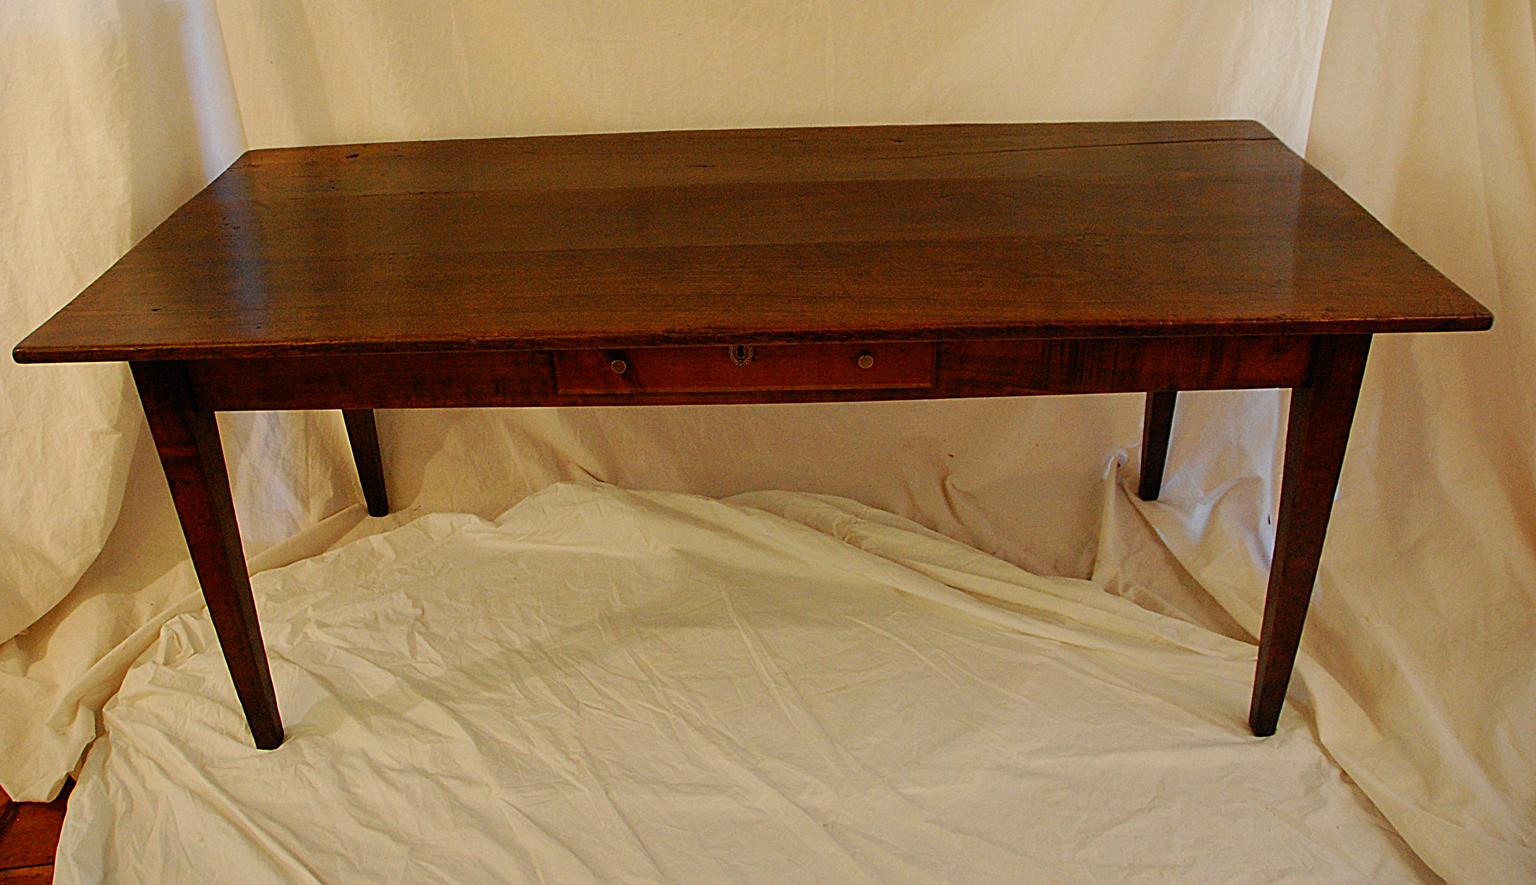 French provincial mid-19th century wild cherry farmhouse table with tapered legs, one side drawer, three board top. This six foot table easily seats eight and has the requisite 24 inch knee room all around; the 32 1/2 inch width makes for